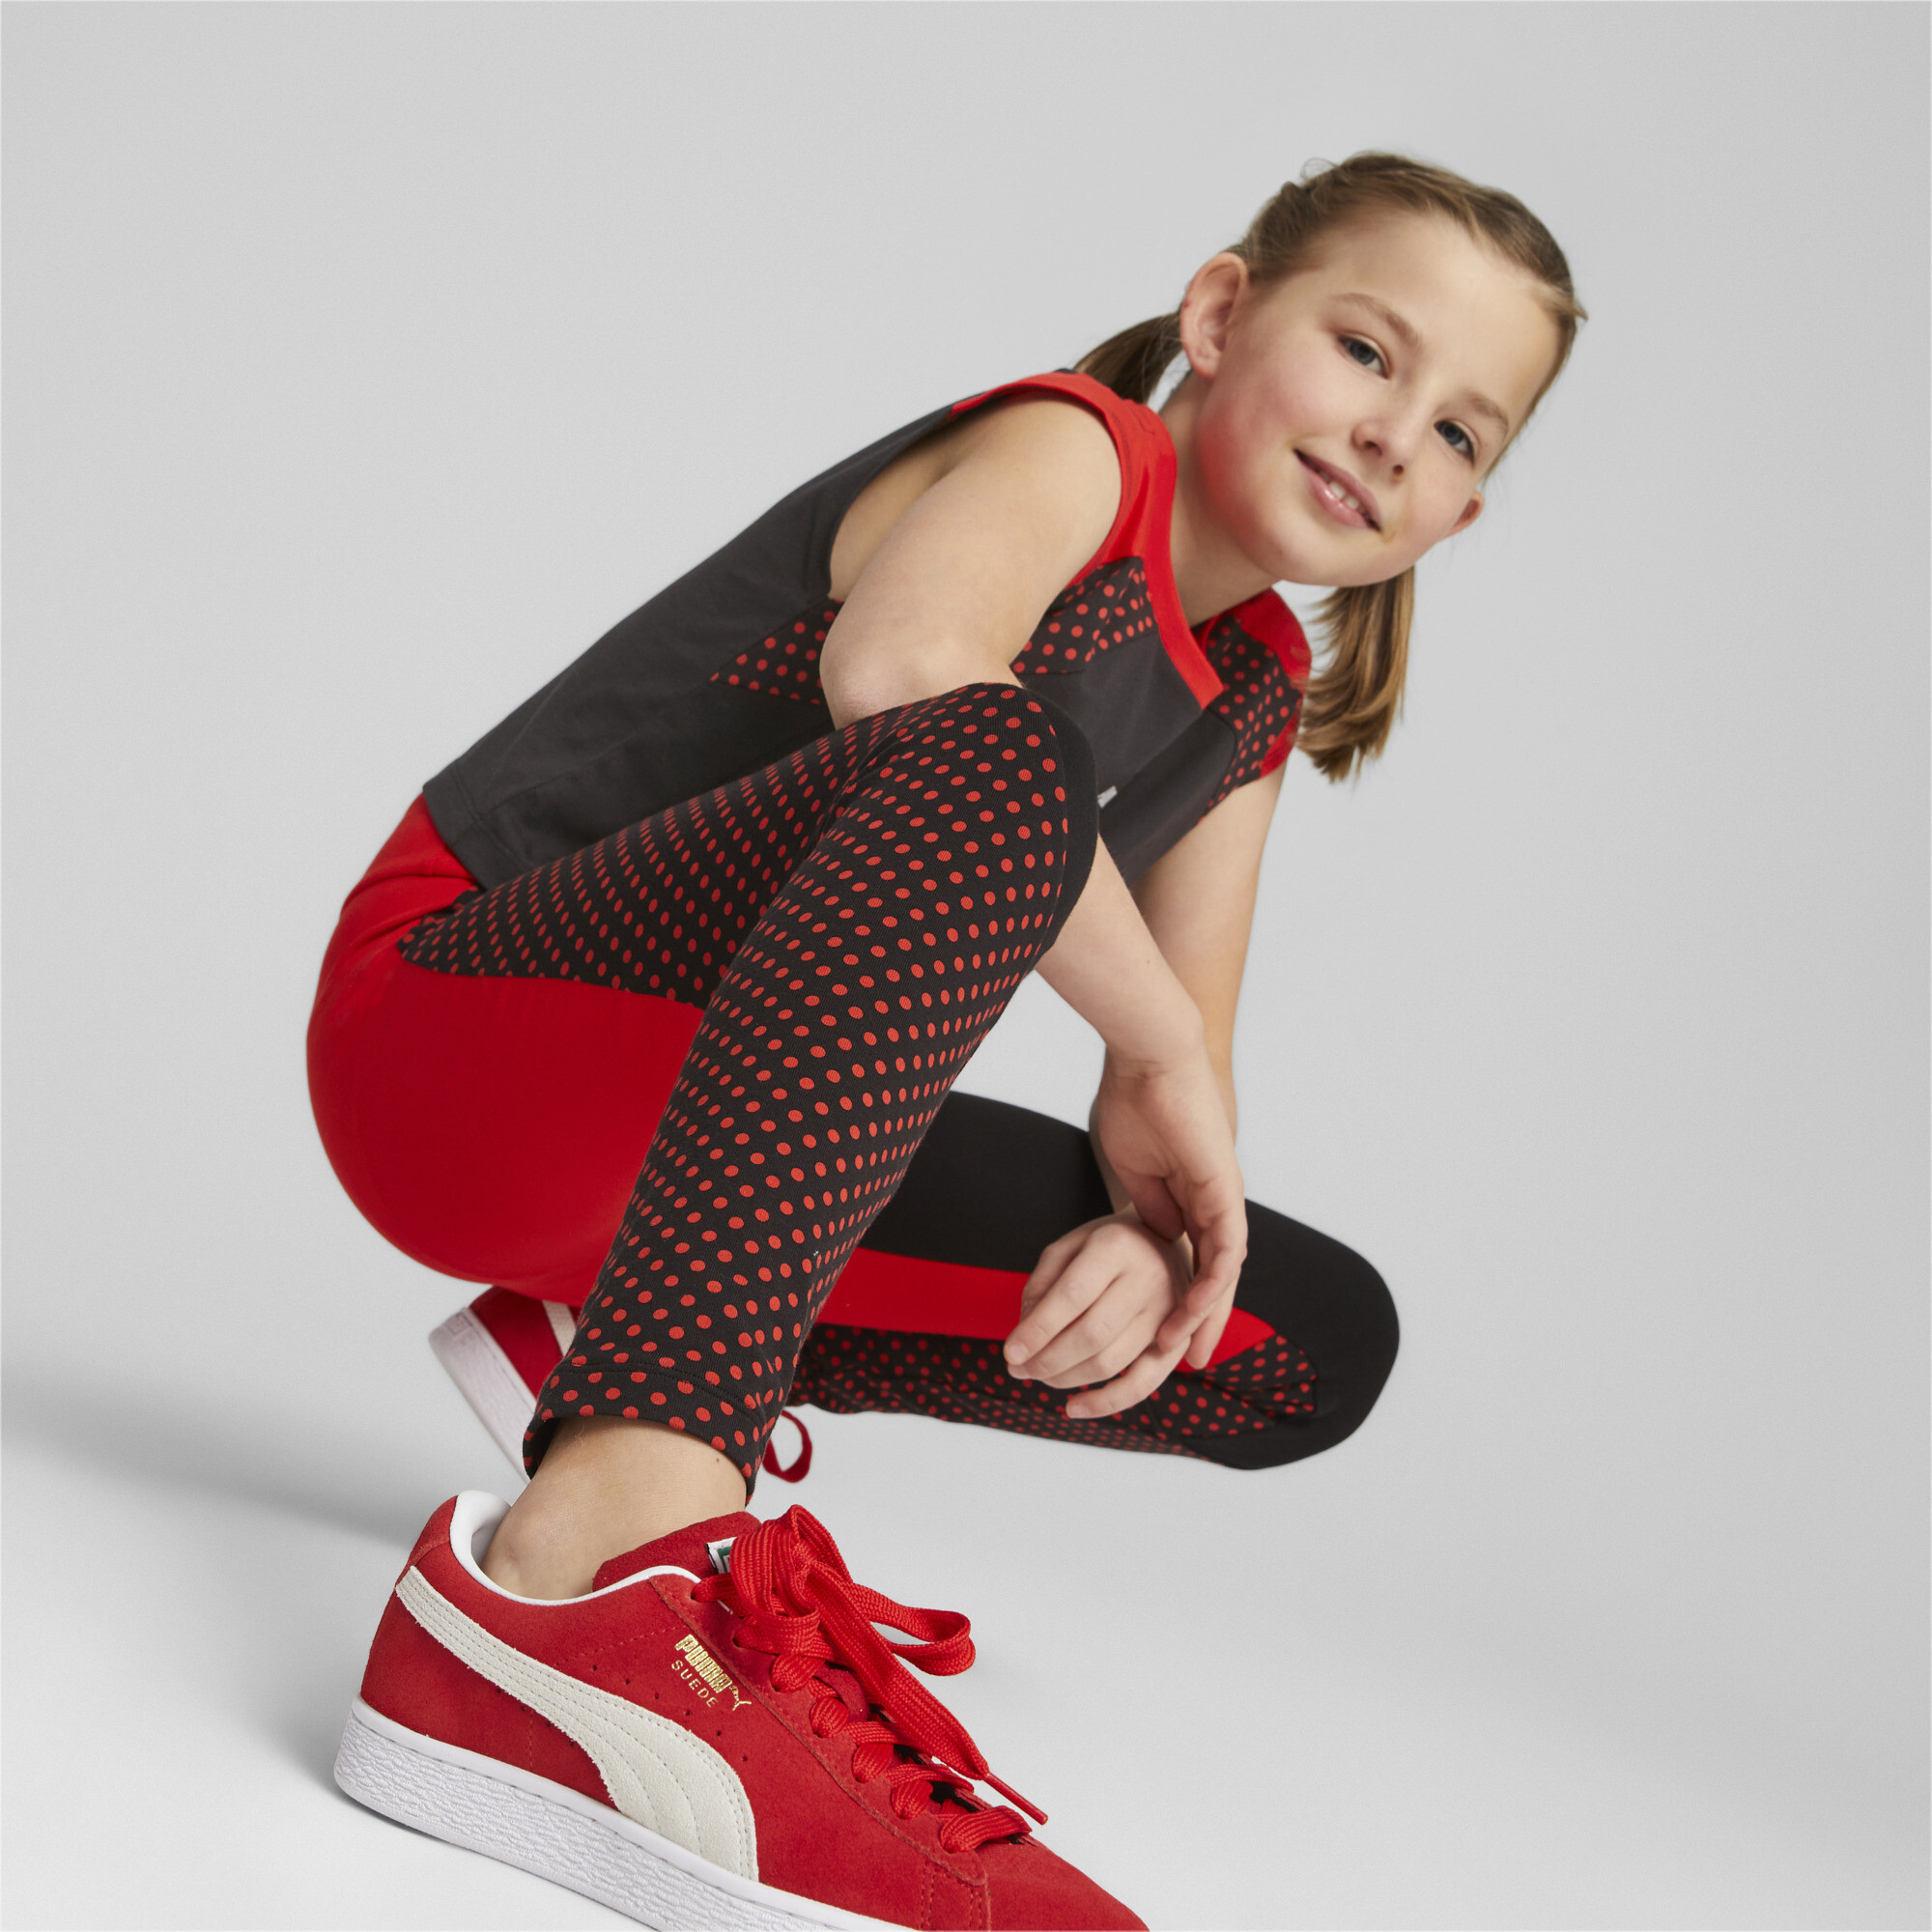 PUMA X MIRACULOUS Leggings In Black, Size 11-12 Youth